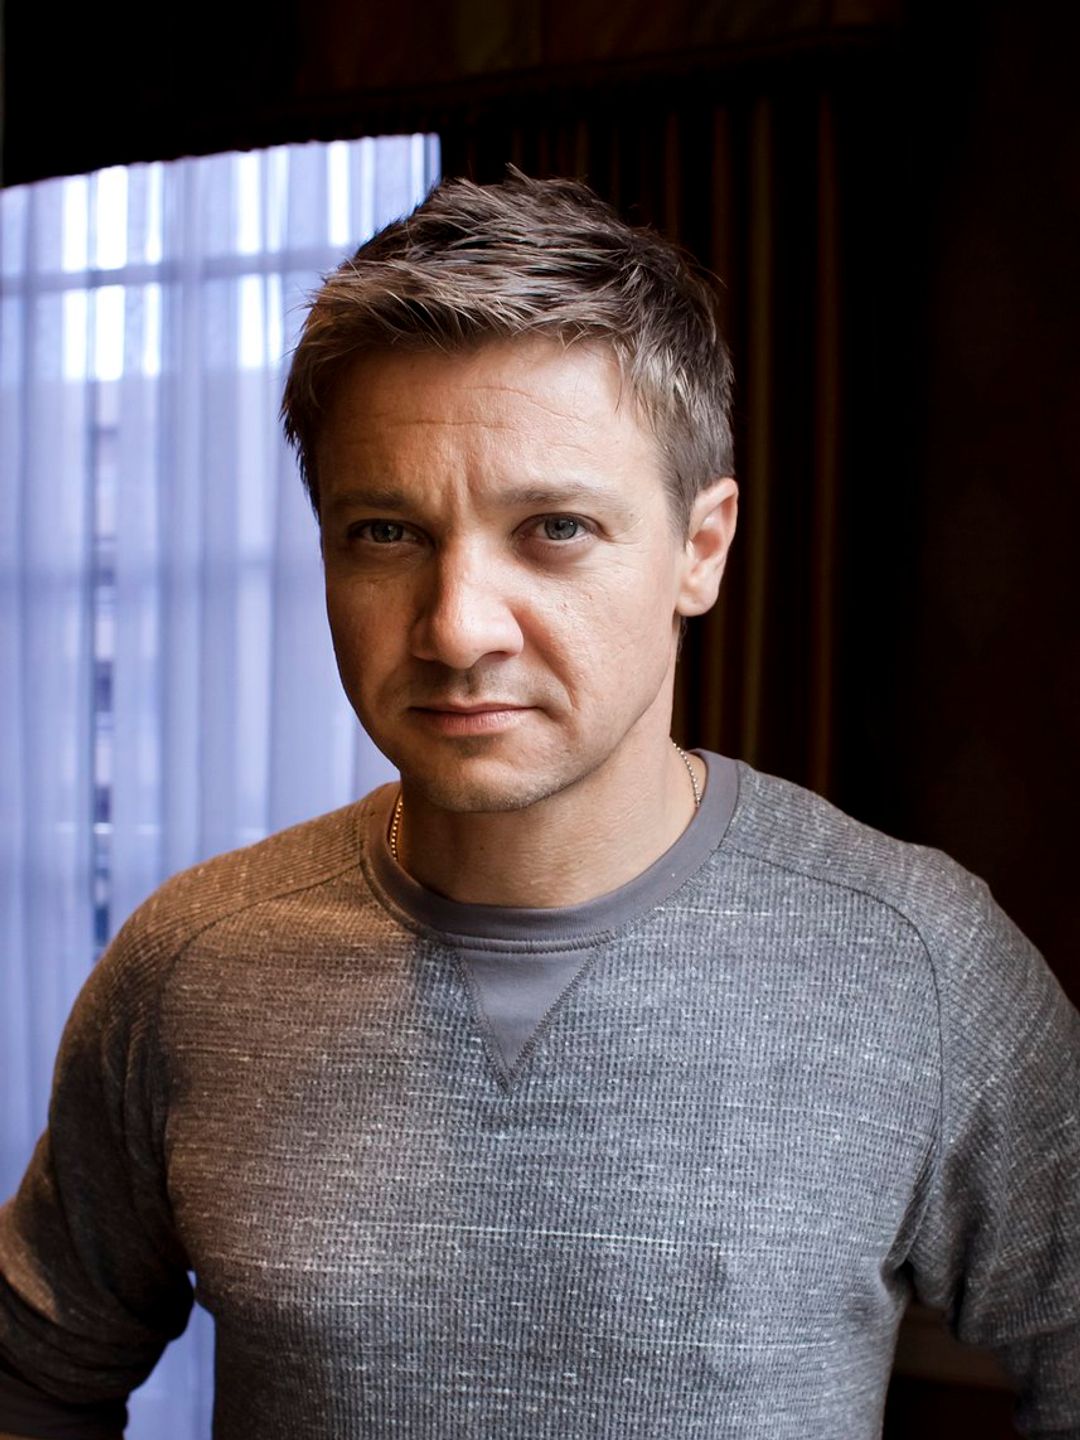 Jeremy Renner early career